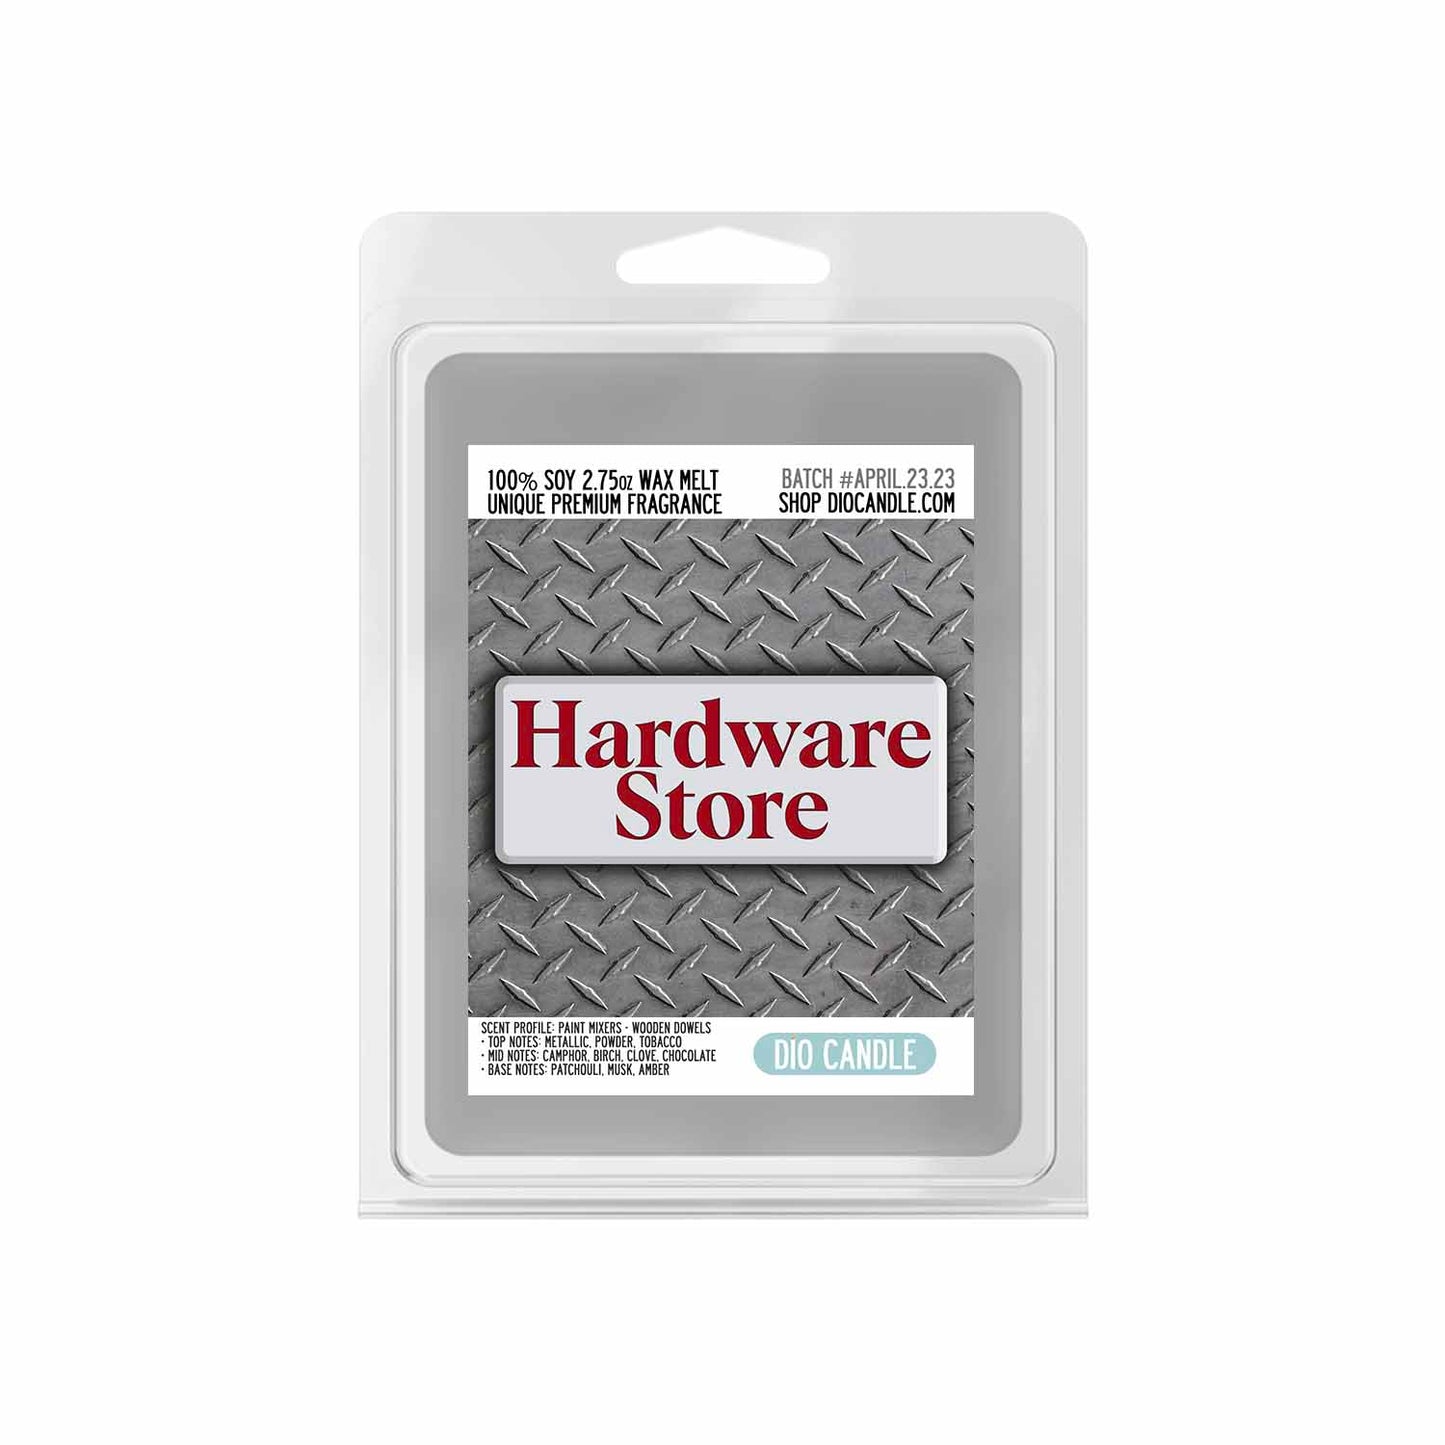 Hardware Store Candle